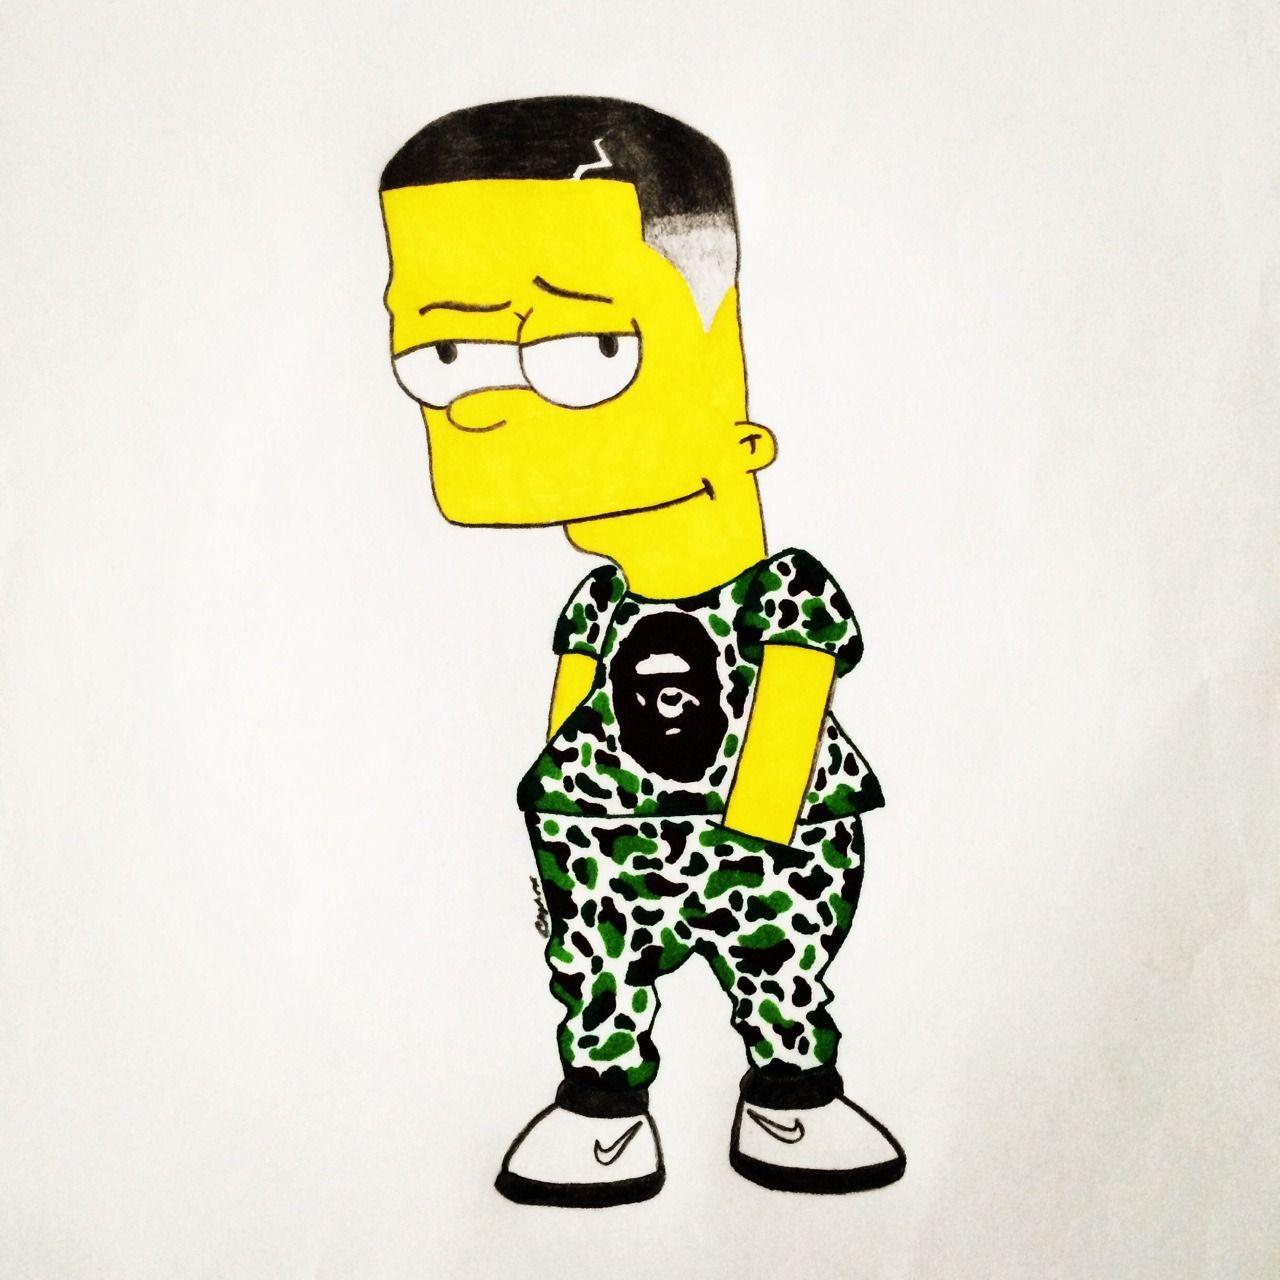 Download The Simpsons Wallpaper With Gucci Wallpaper